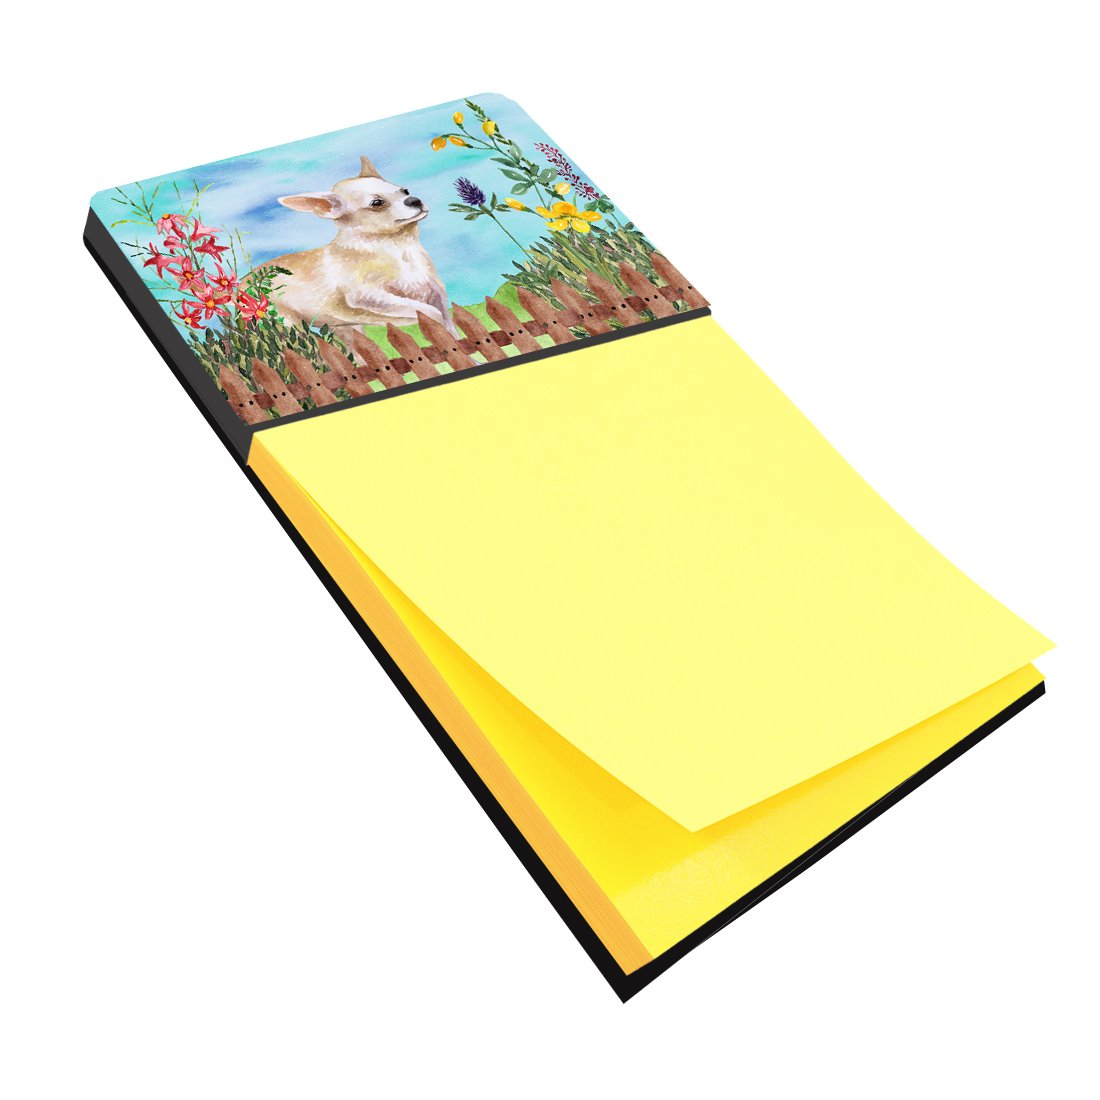 Chihuahua Leg up Spring Sticky Note Holder CK1259SN by Caroline's Treasures